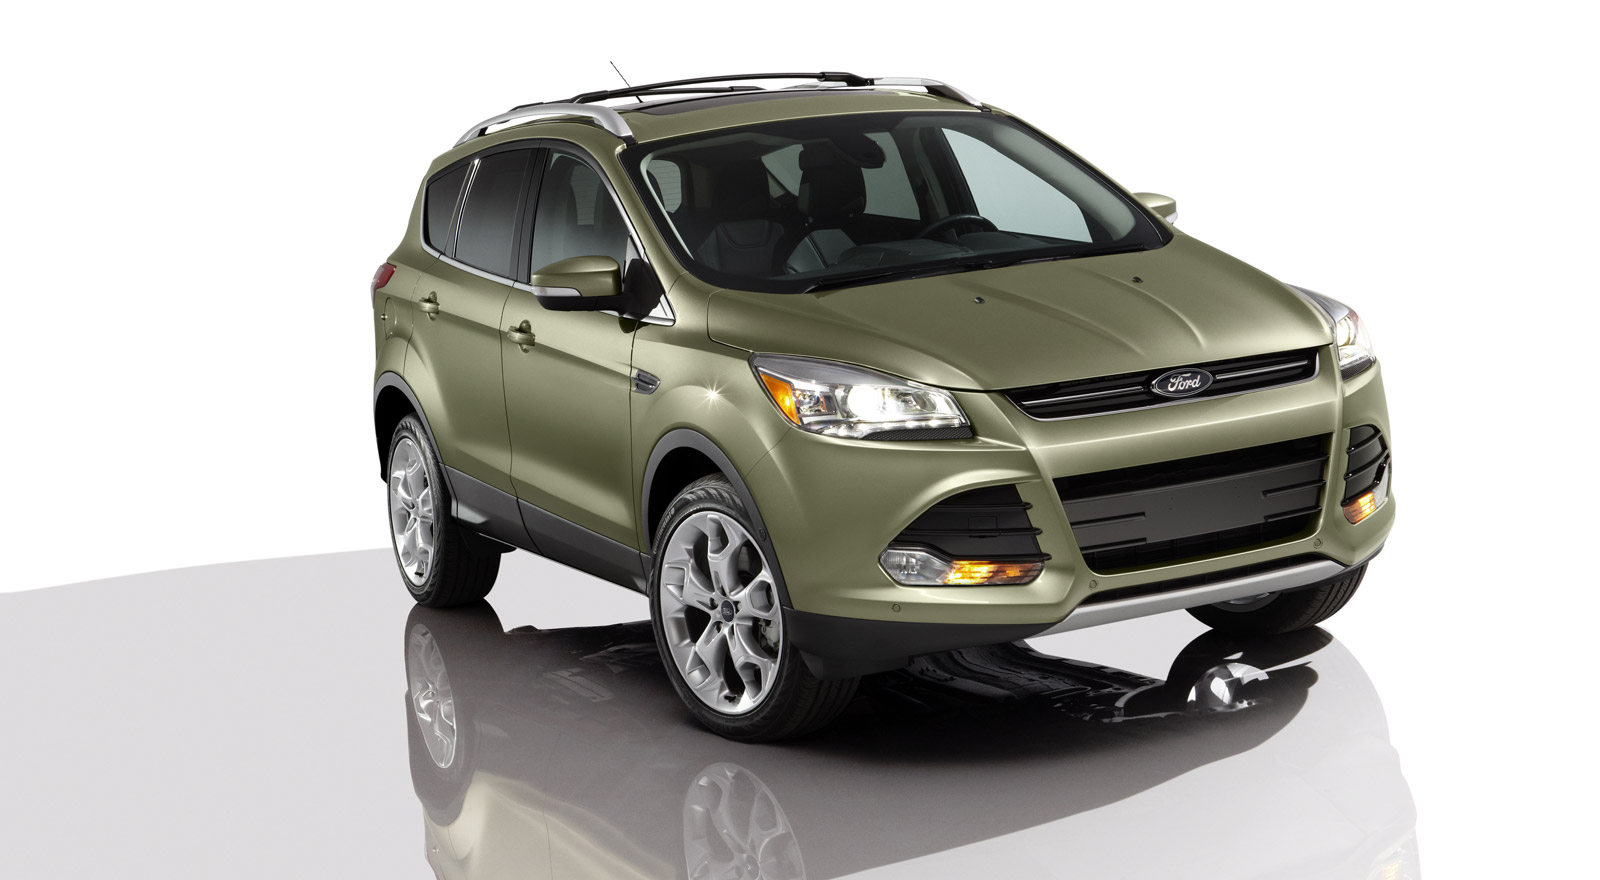 2013 Ford Escape, 2013-2014 Focus ST Recalled To Fix Electrical Glitch Linked To Stalling